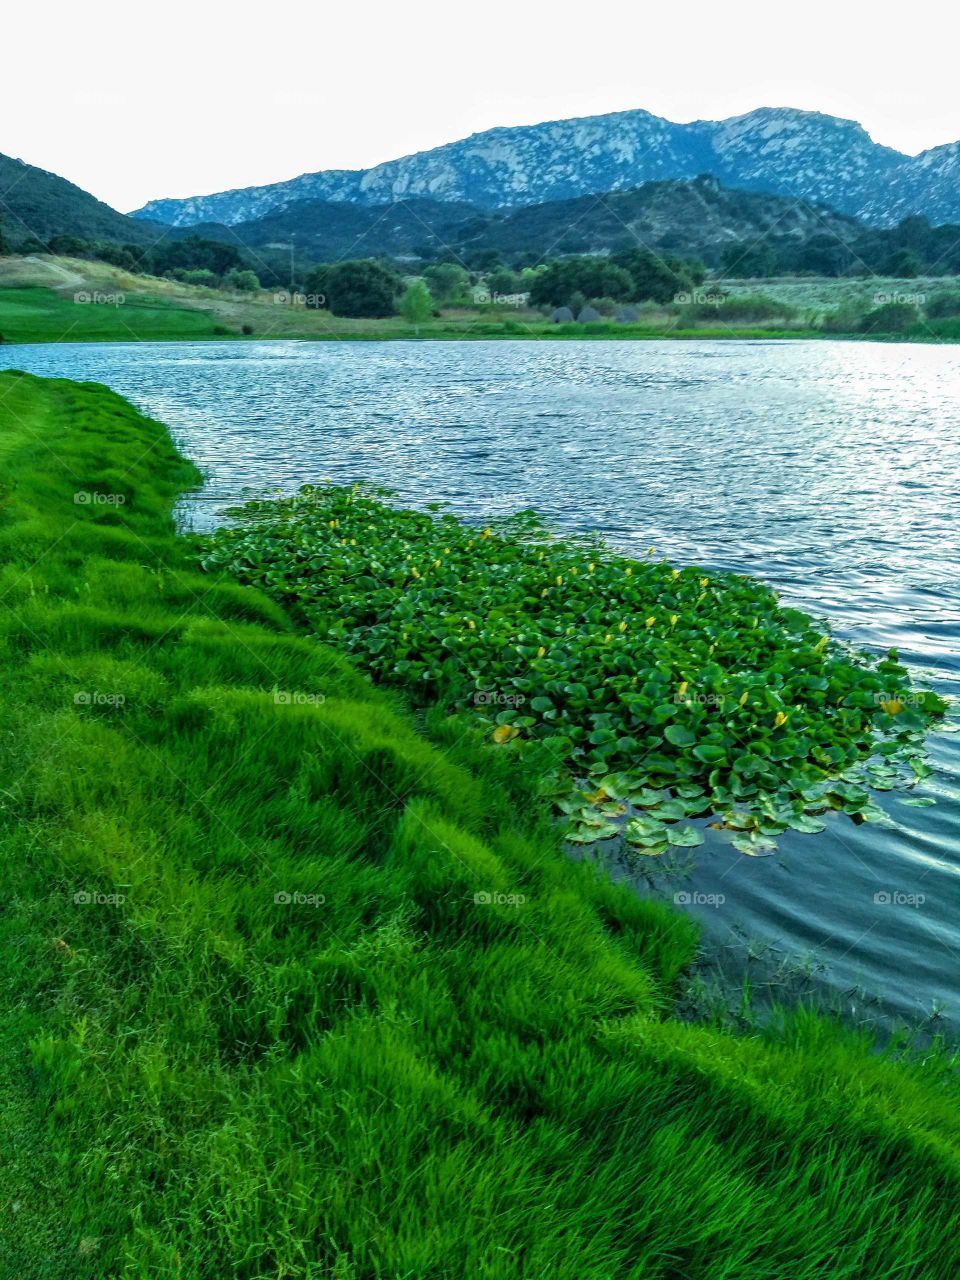 on a golf course overlooking a mountain with a lily pad in the water you can go to take pictures in California